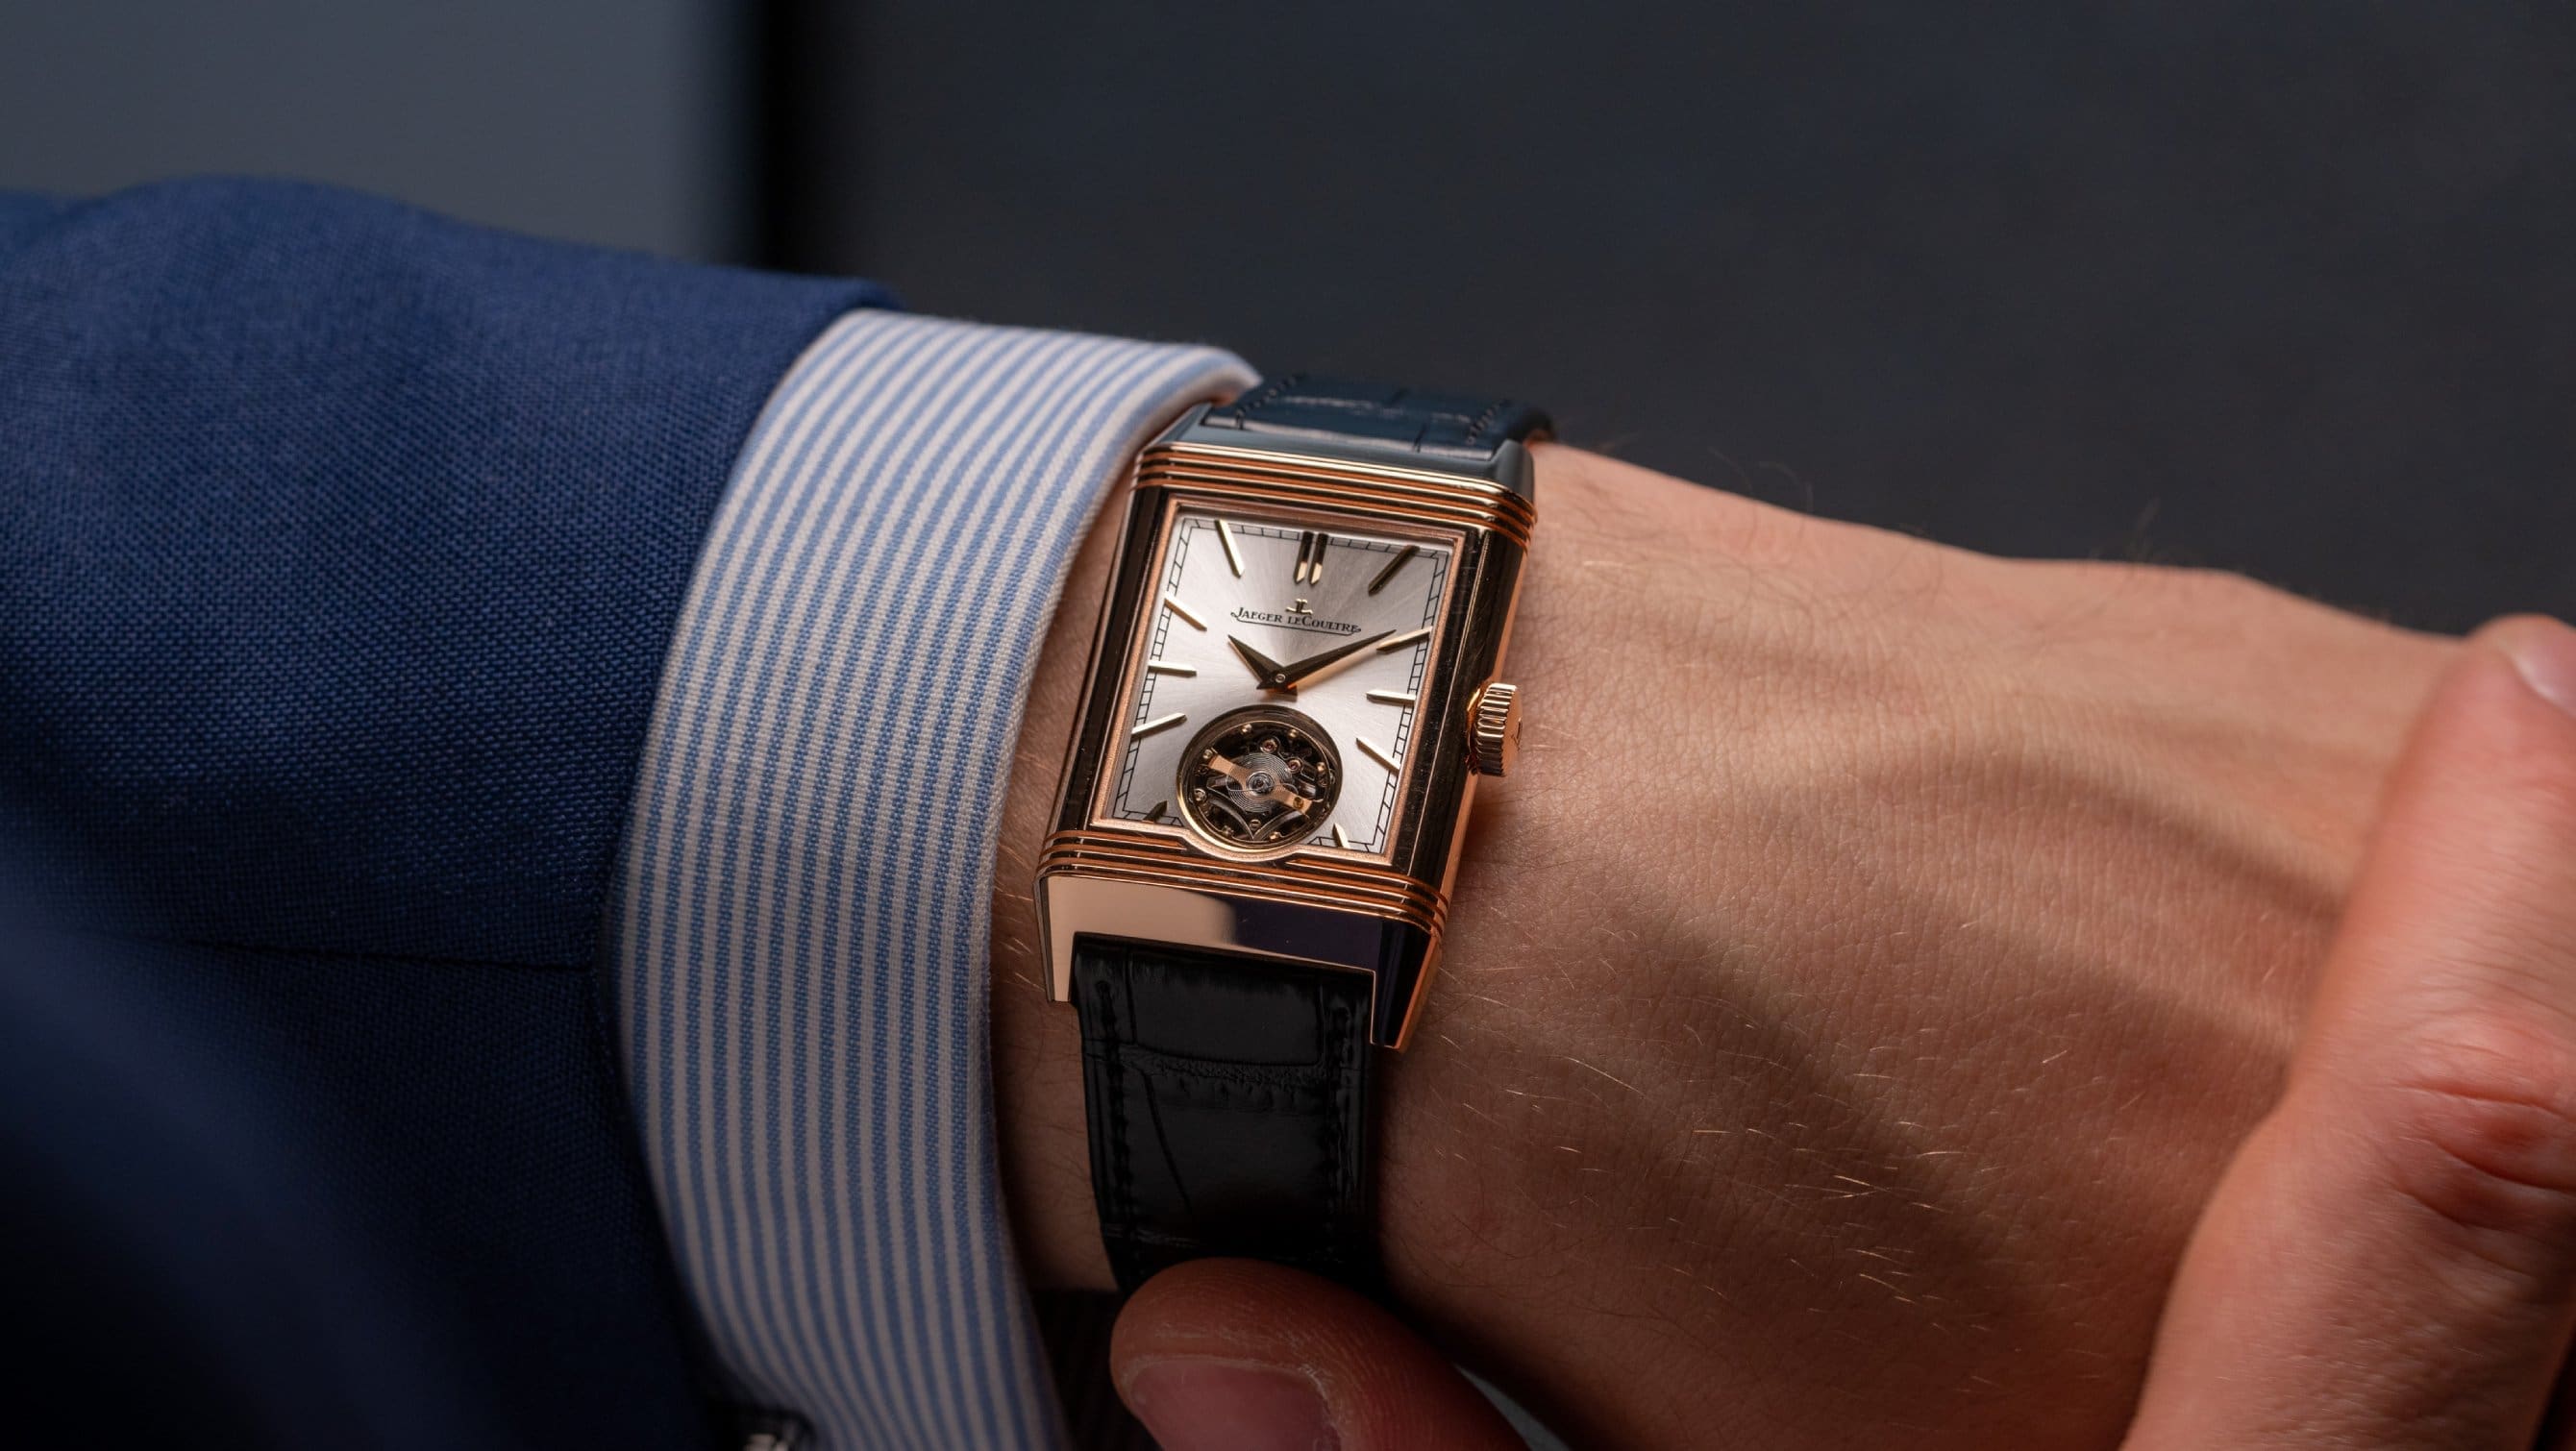 The two faces of the Jaeger-LeCoultre Reverso Tribute Duoface Tourbillon